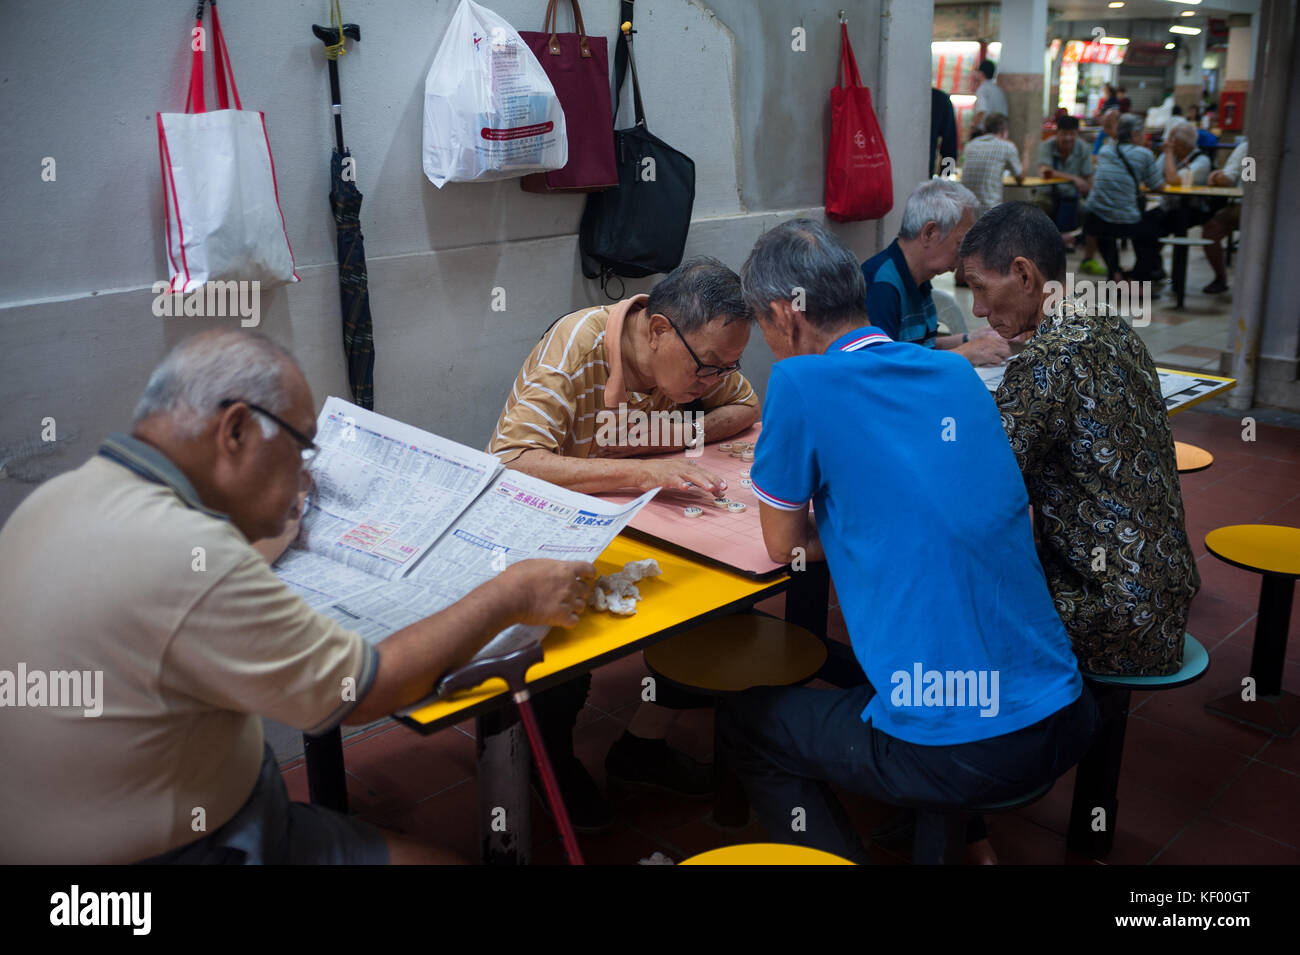 20.10.2017, Singapore, Republic of Singapore, Asia - Elderly men play Chinese chess, also known as Xiangqi in Singapore's Chinatown district. Stock Photo